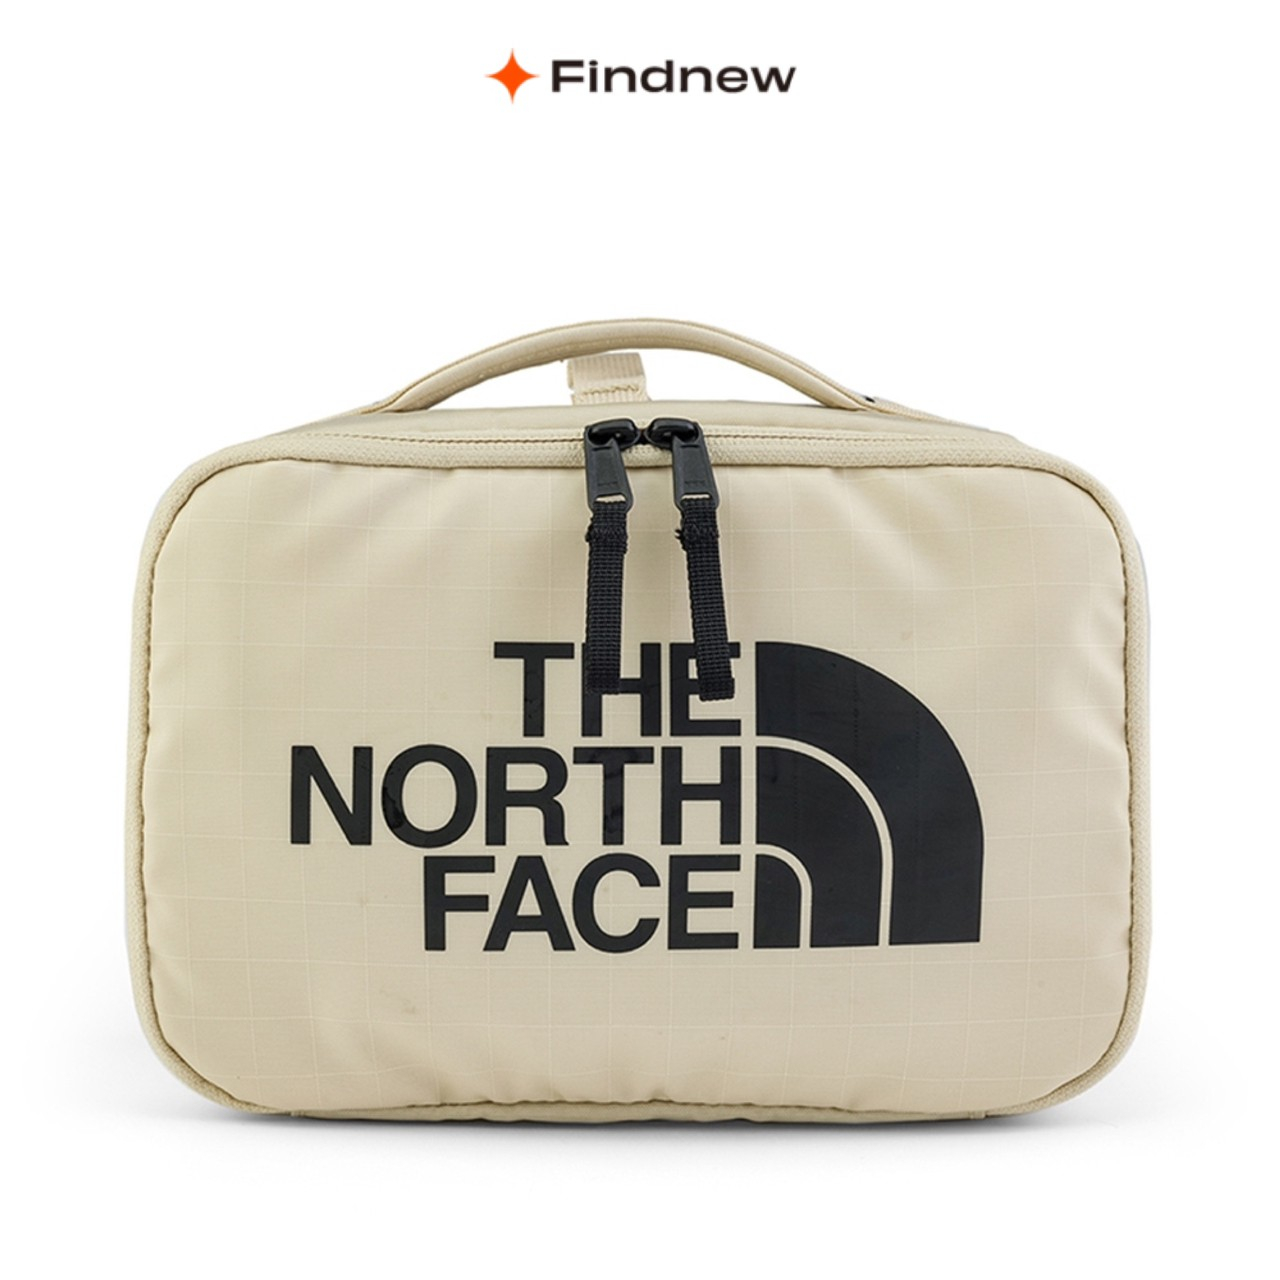 THE NORTH FACE 旅行收納包 NF0A81BL4D5【Findnew】